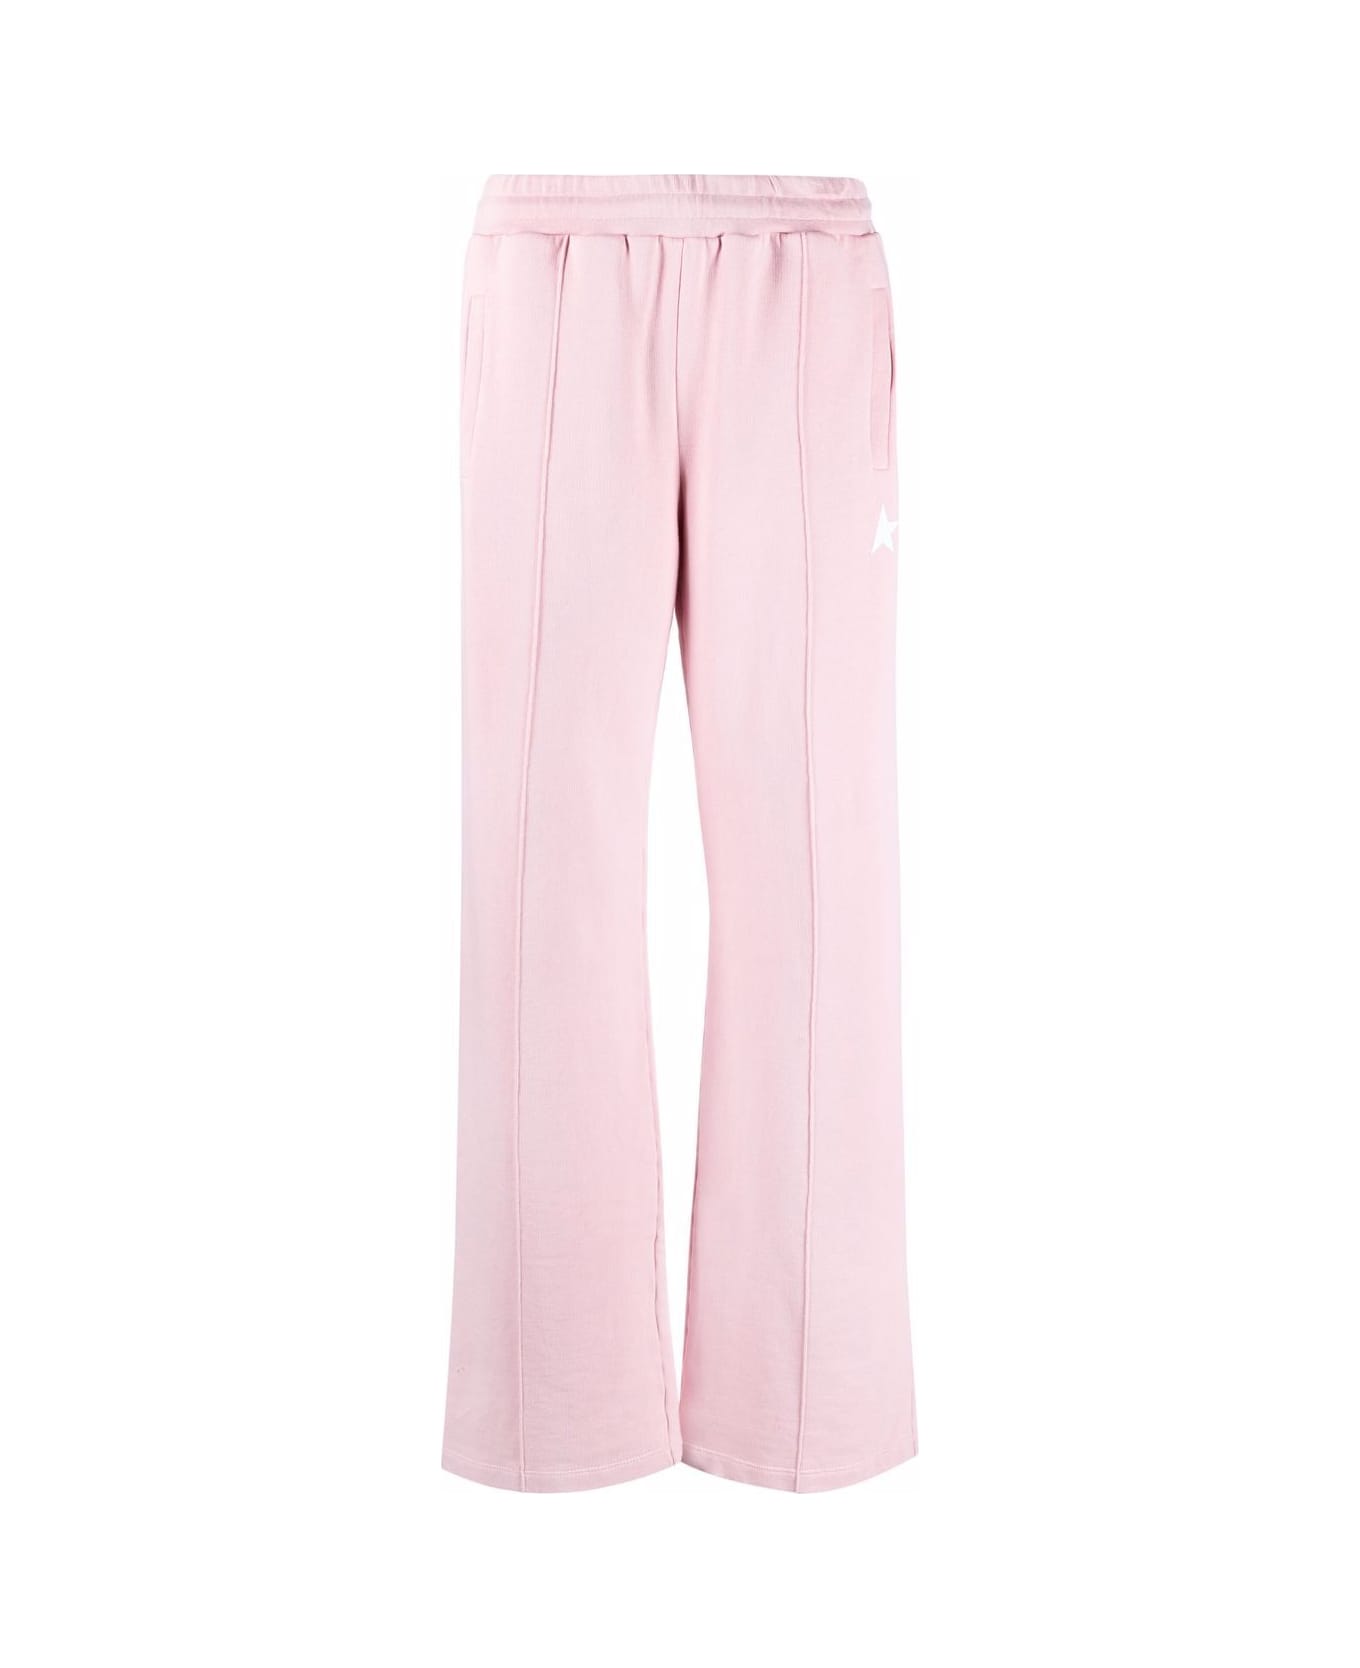 Golden Goose Cotton Trousers - Rosa ボトムス